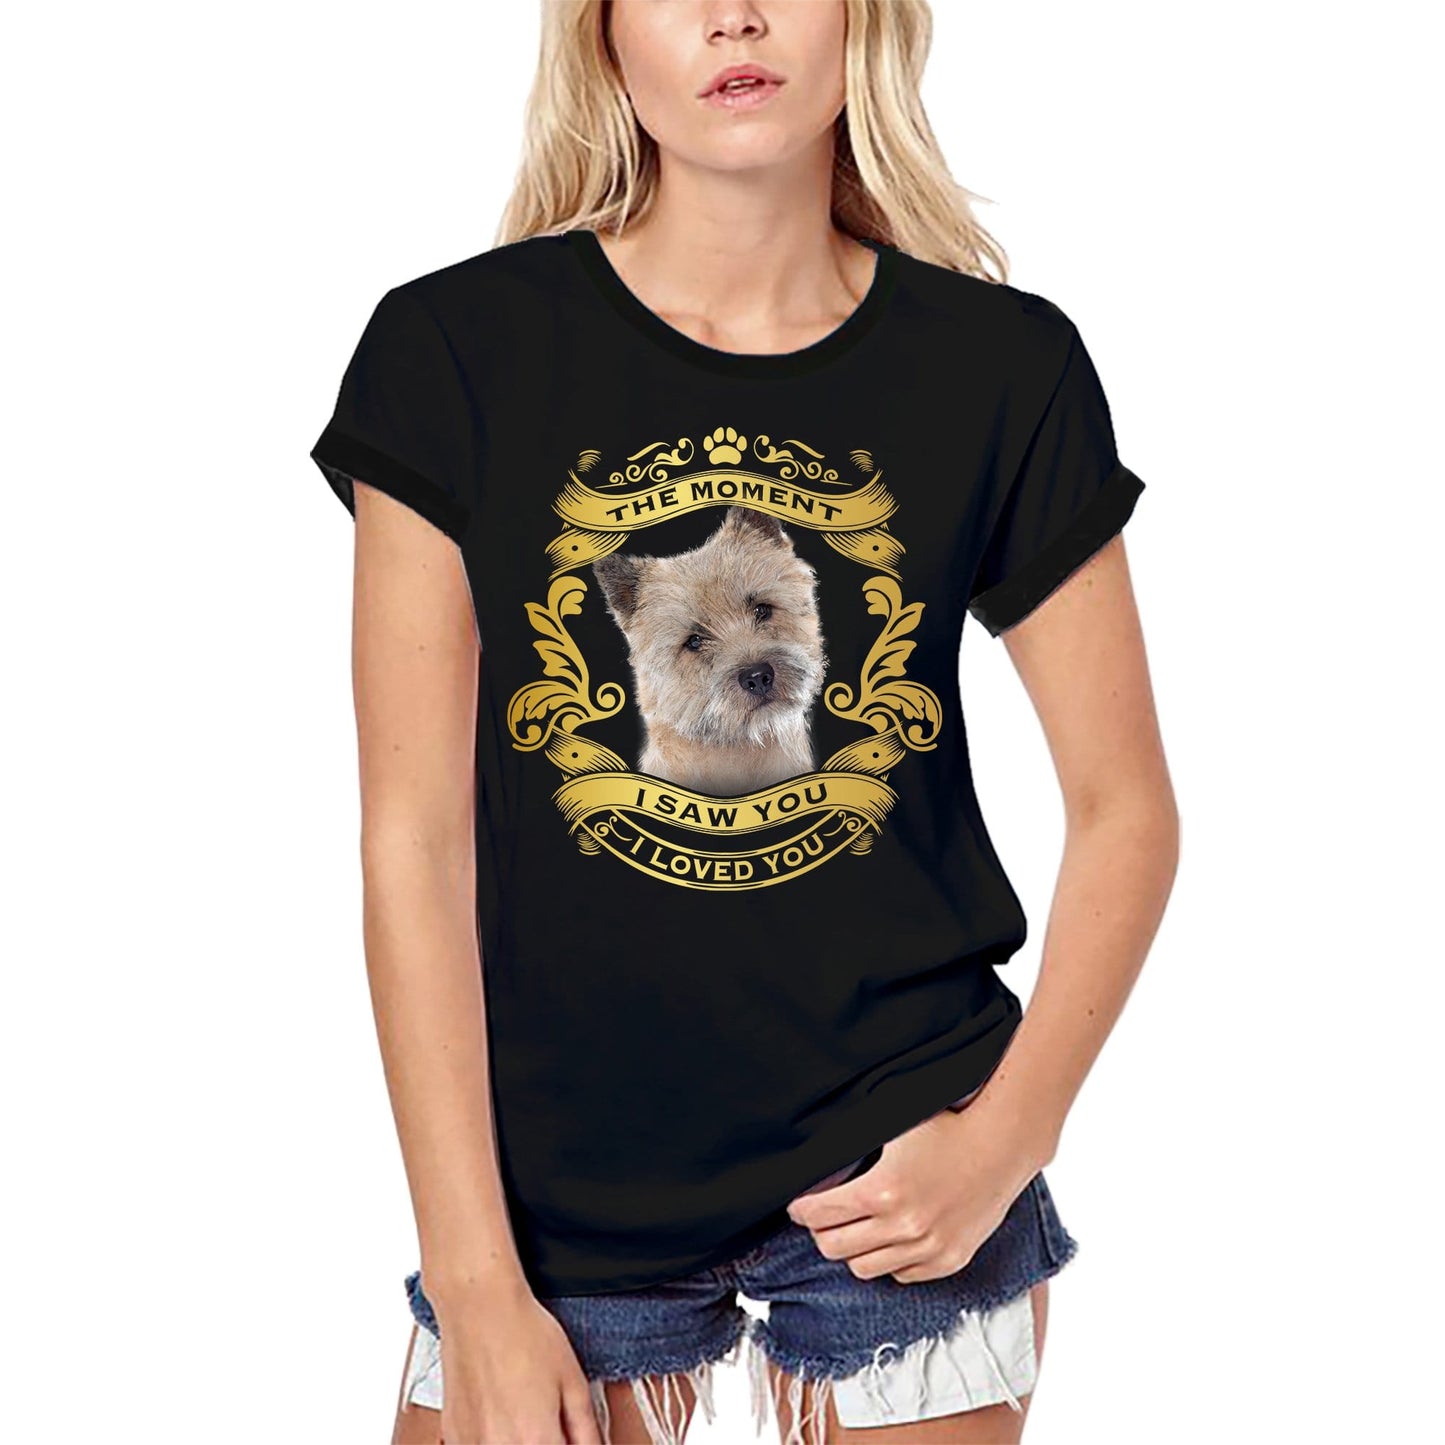 ULTRABASIC Women's Organic T-Shirt Cairn Terrier Dog - Moment I Saw You I Loved You Puppy Tee Shirt for Ladies